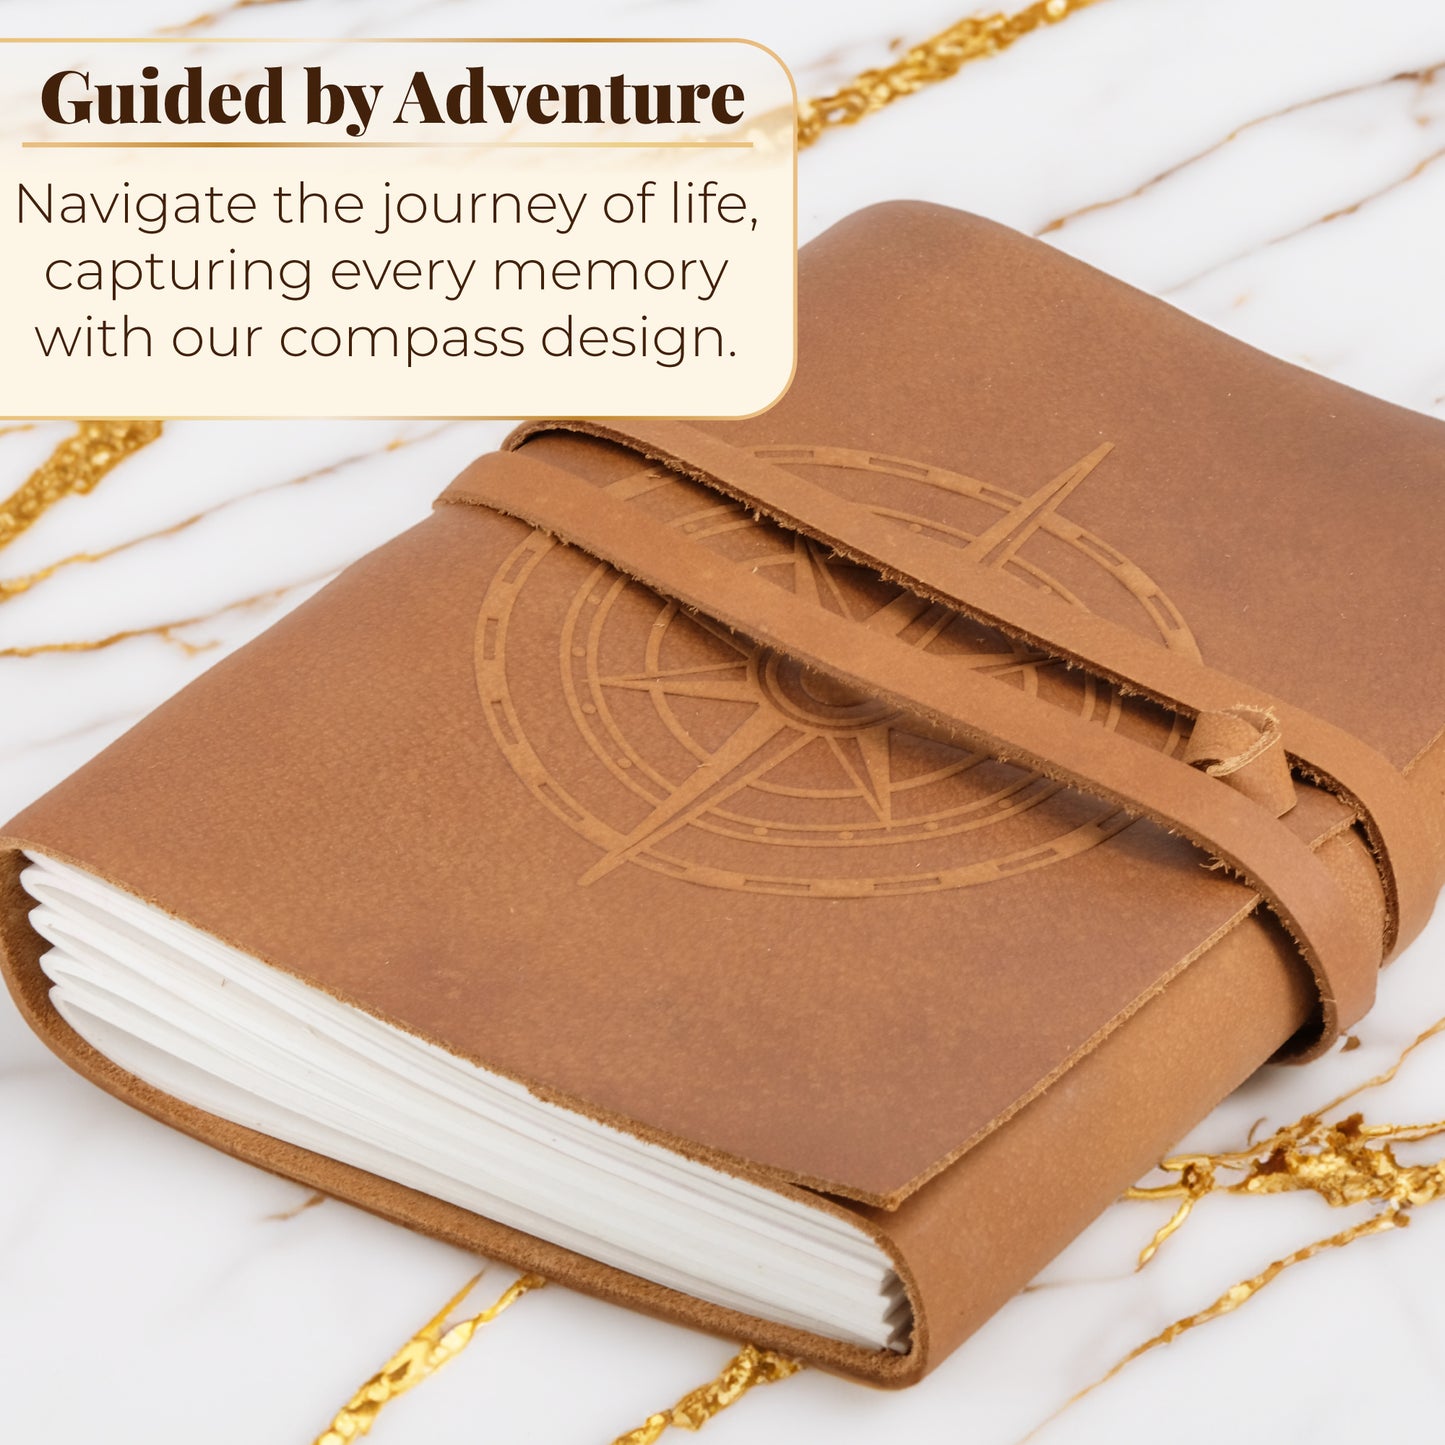 Leather Journal with Lined Pages - Leather Bound Writing Journal